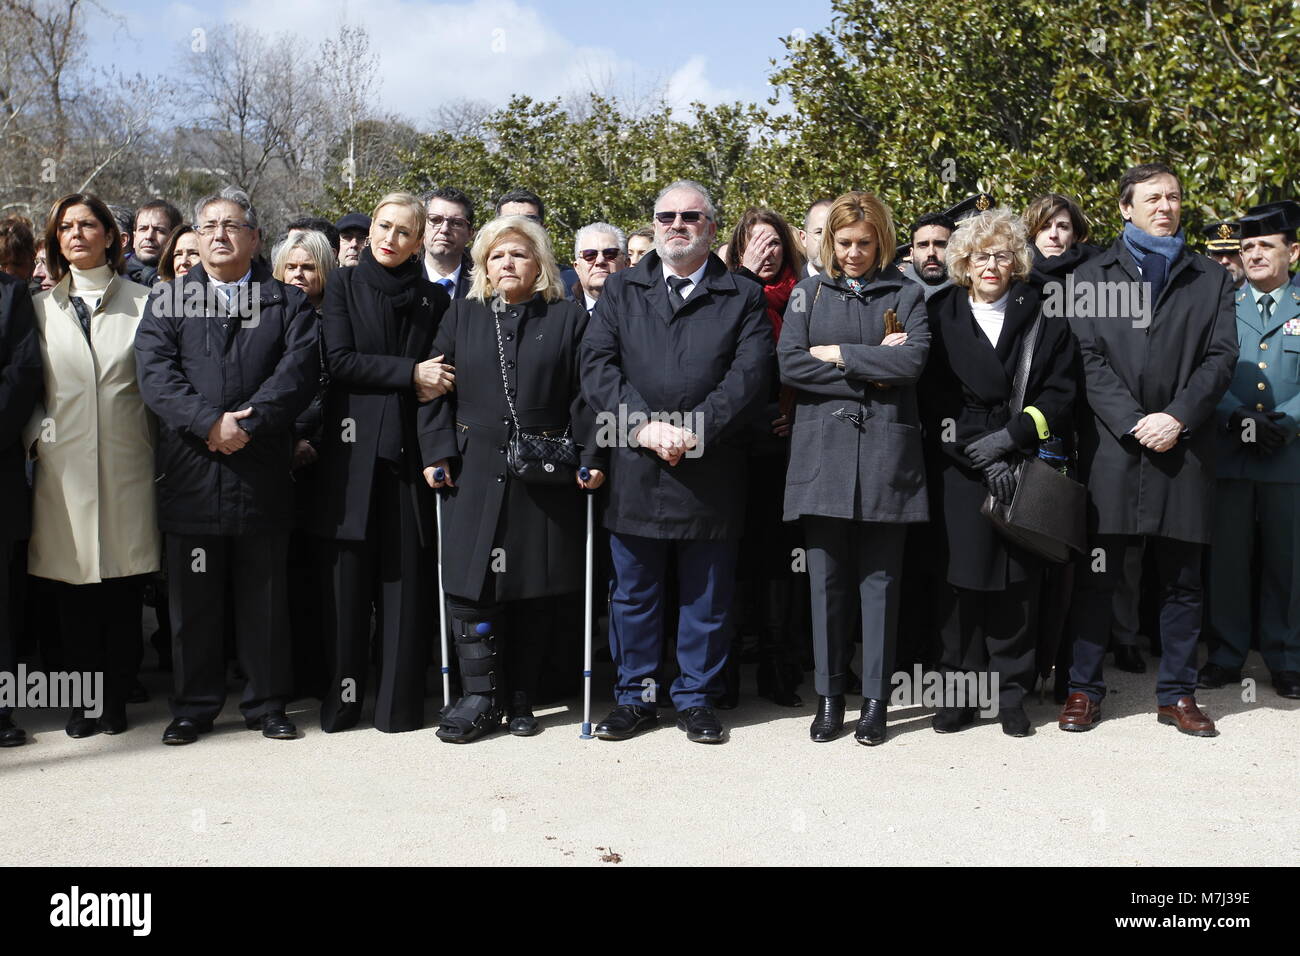 Madrid, Spain. 11th March, 2018.President of the Community of Madrid, Cristina Cifuentes, politicans Juan Ignacio Zoido, Maria Dolores de Cospedal, Manuela Carmena during a tribute in memory of the victims of the attack of 11-M 2004, at the forest of the Retiro Park on Sunday 11 March 2018. Credit: Gtres Información más Comuniación on line, S.L./Alamy Live News Stock Photo